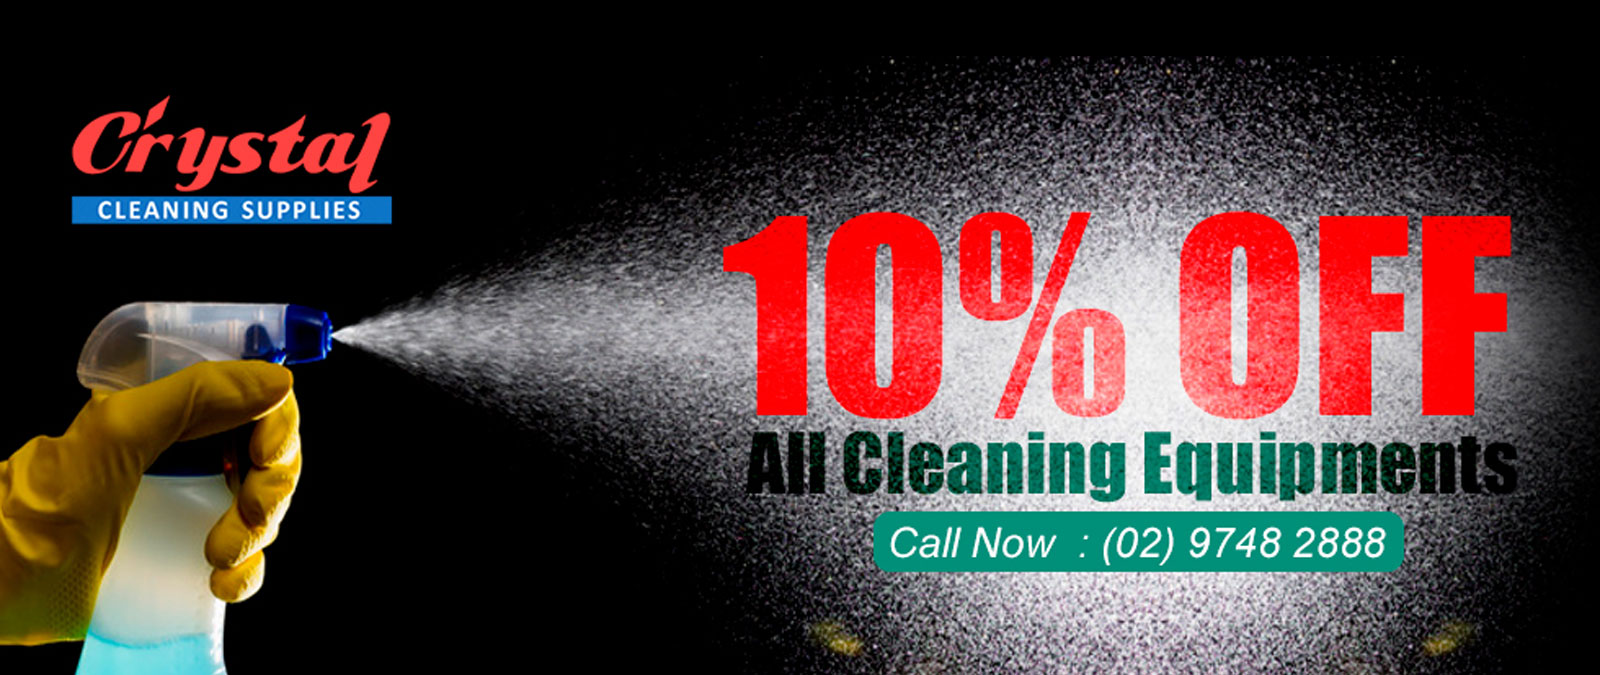 Australian Bright Services In The Sydney Region Best Offer For Professional C Commercial Cleaning Services Construction Cleaning Professional Cleaning Services